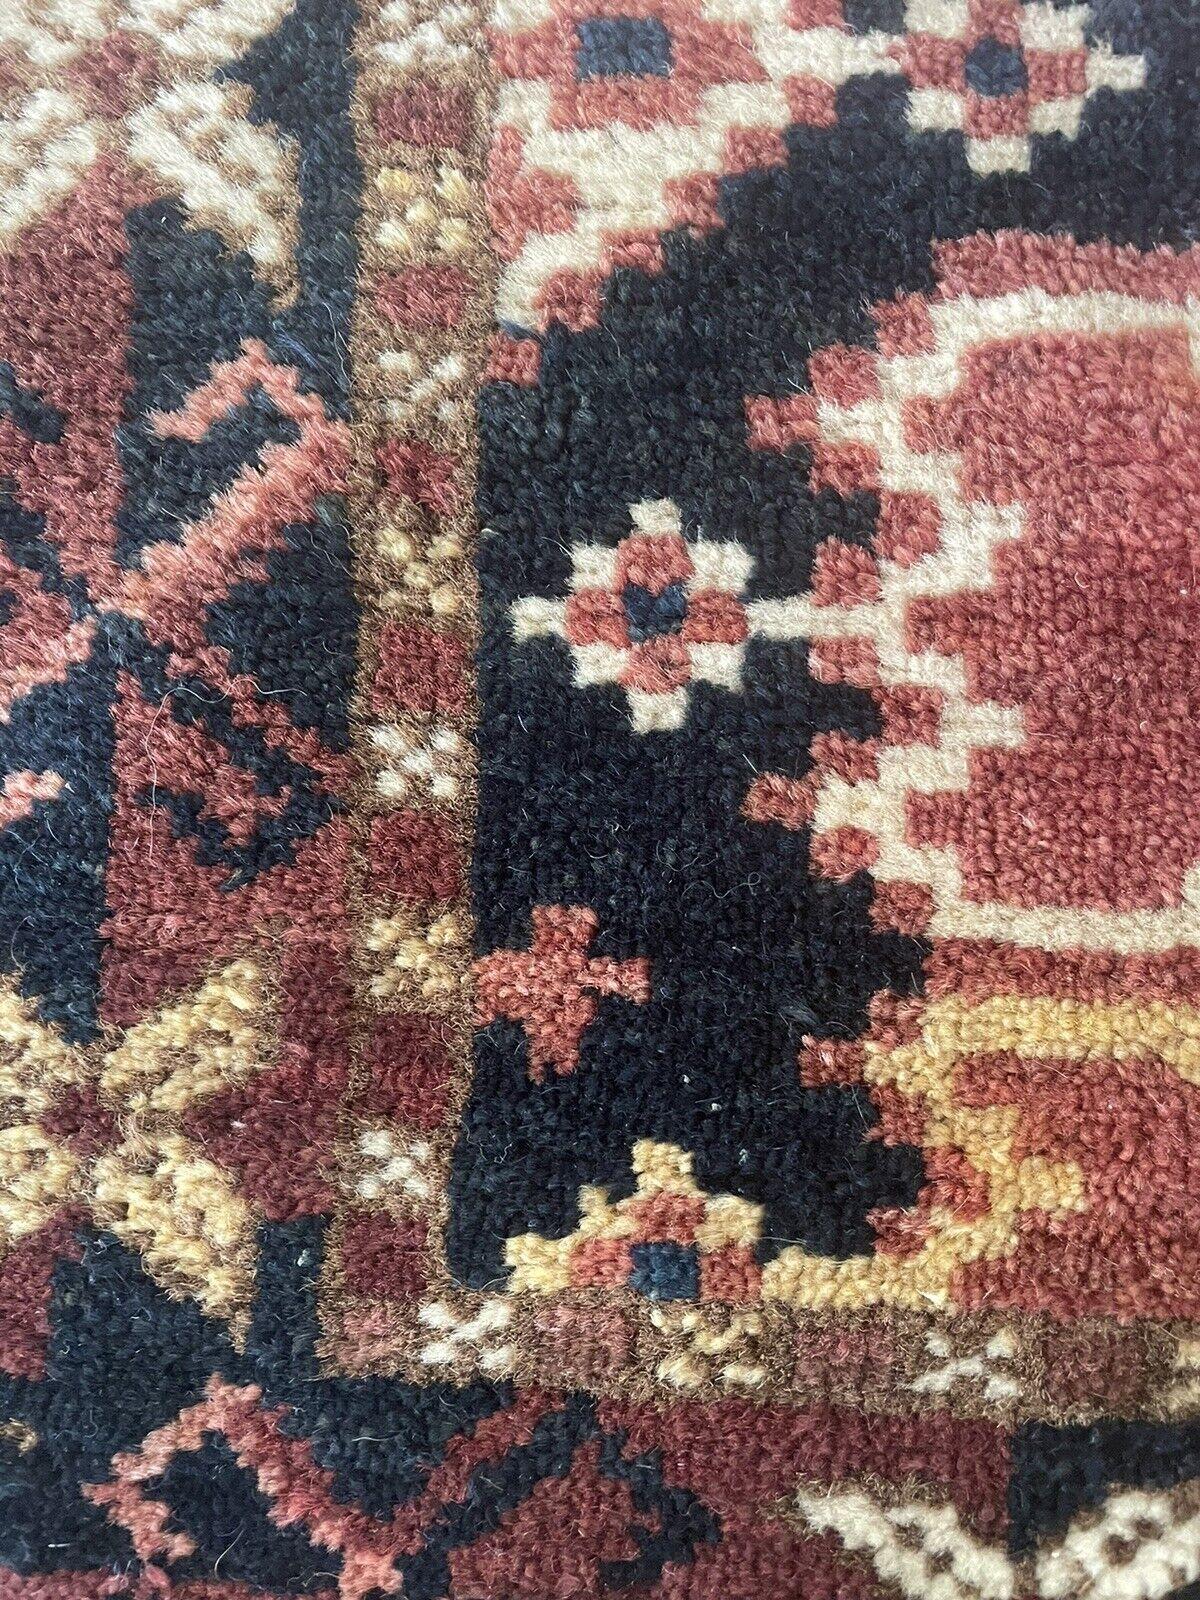 Handmade Antique Afghan Beshir Collectible Chuval Rug 1.5' x 4.8', 1900s - 1N11 For Sale 10